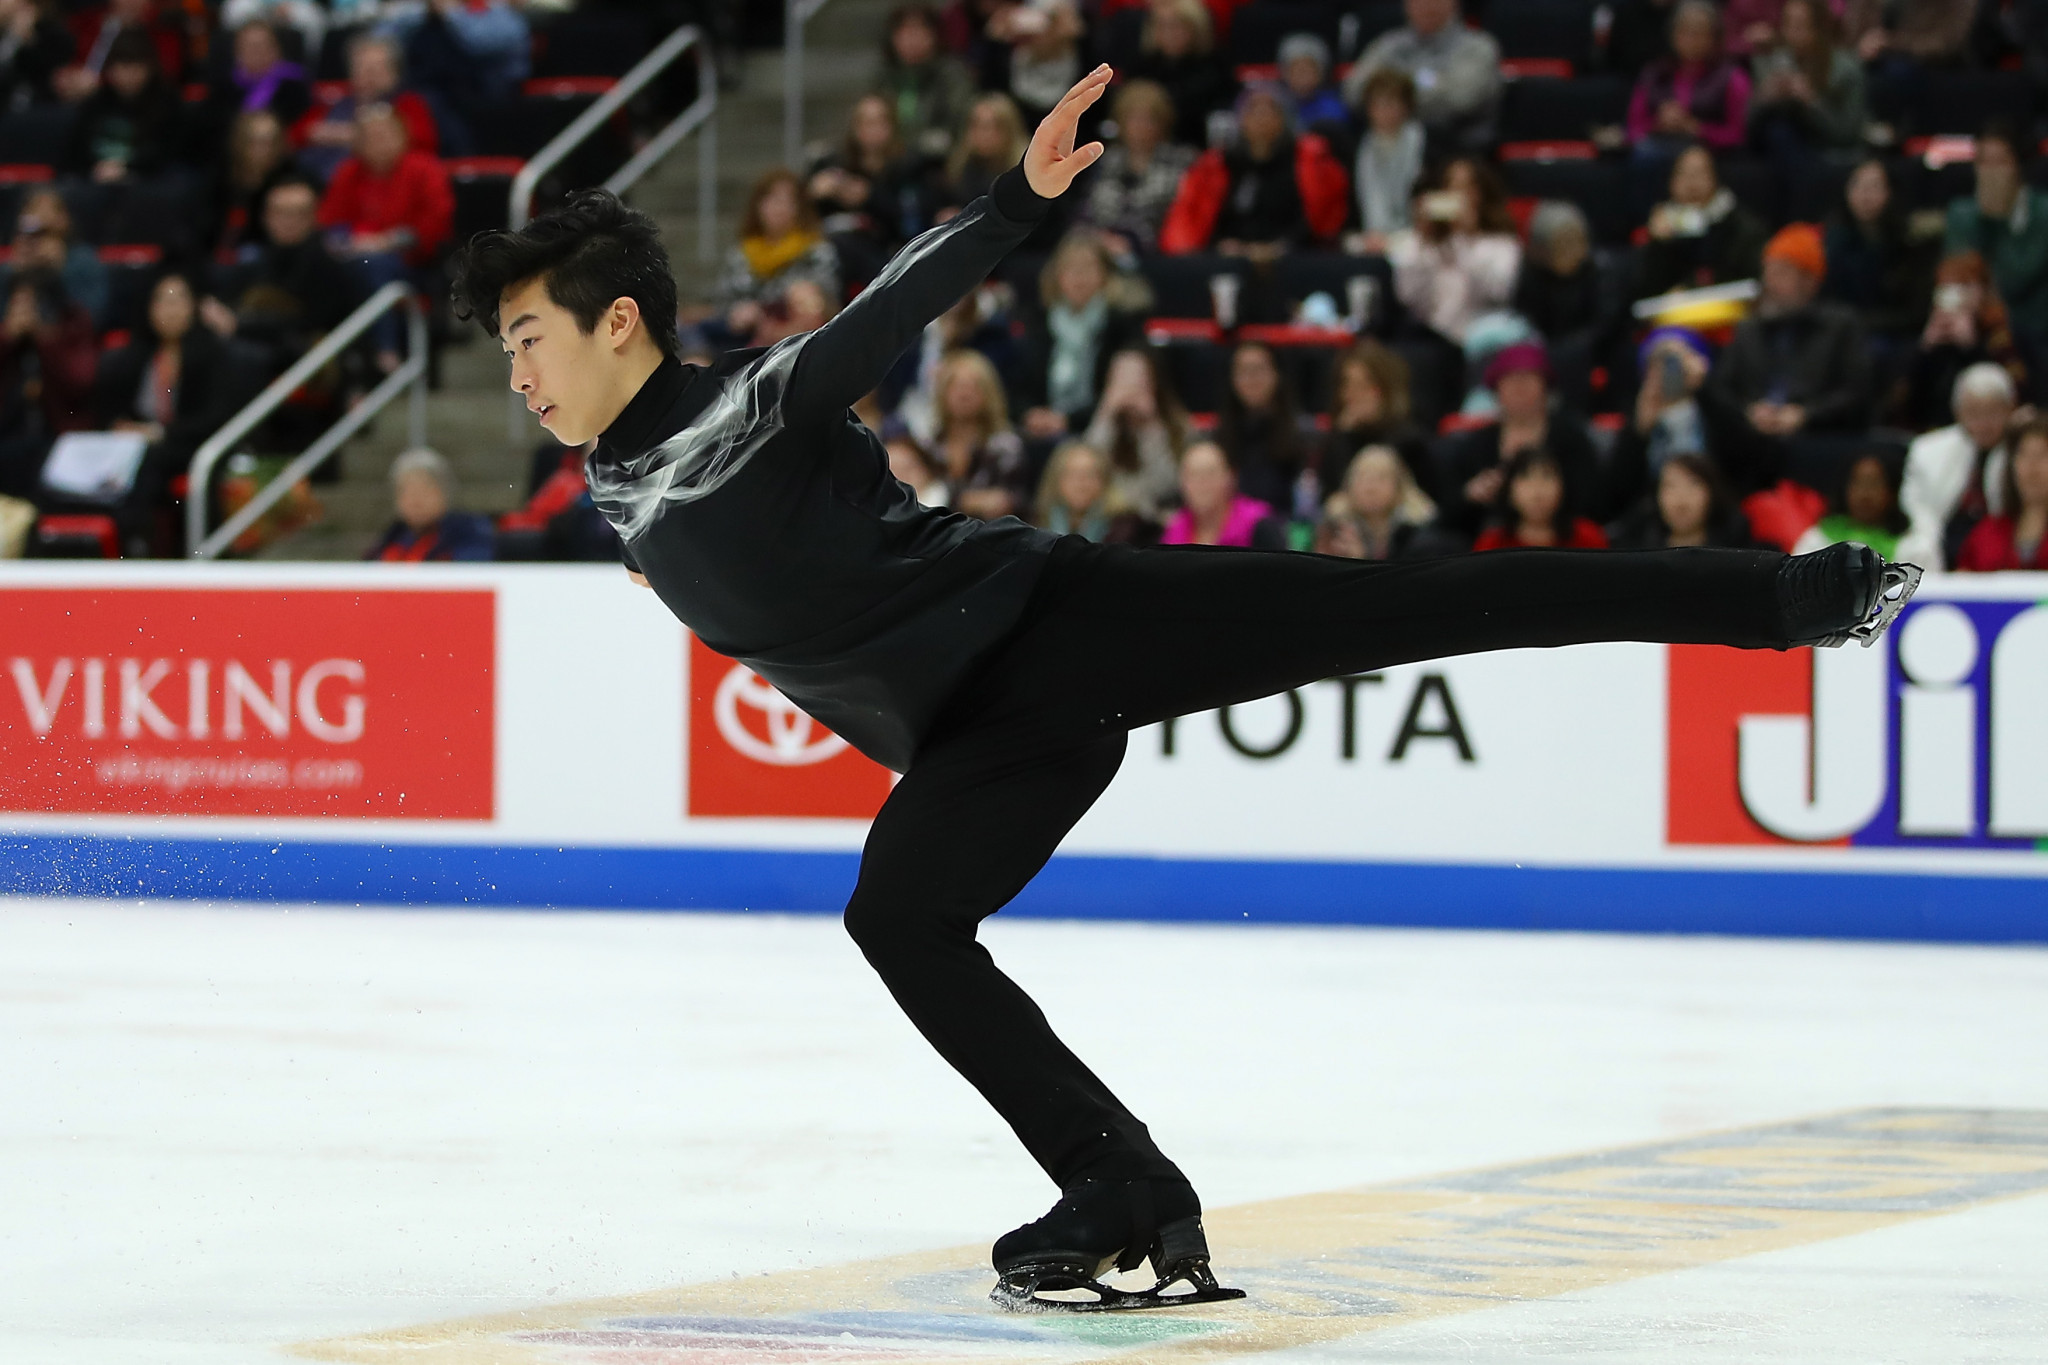 It is thought that two-time world champion Nathan Chen will compete at Skate America ©Getty Images